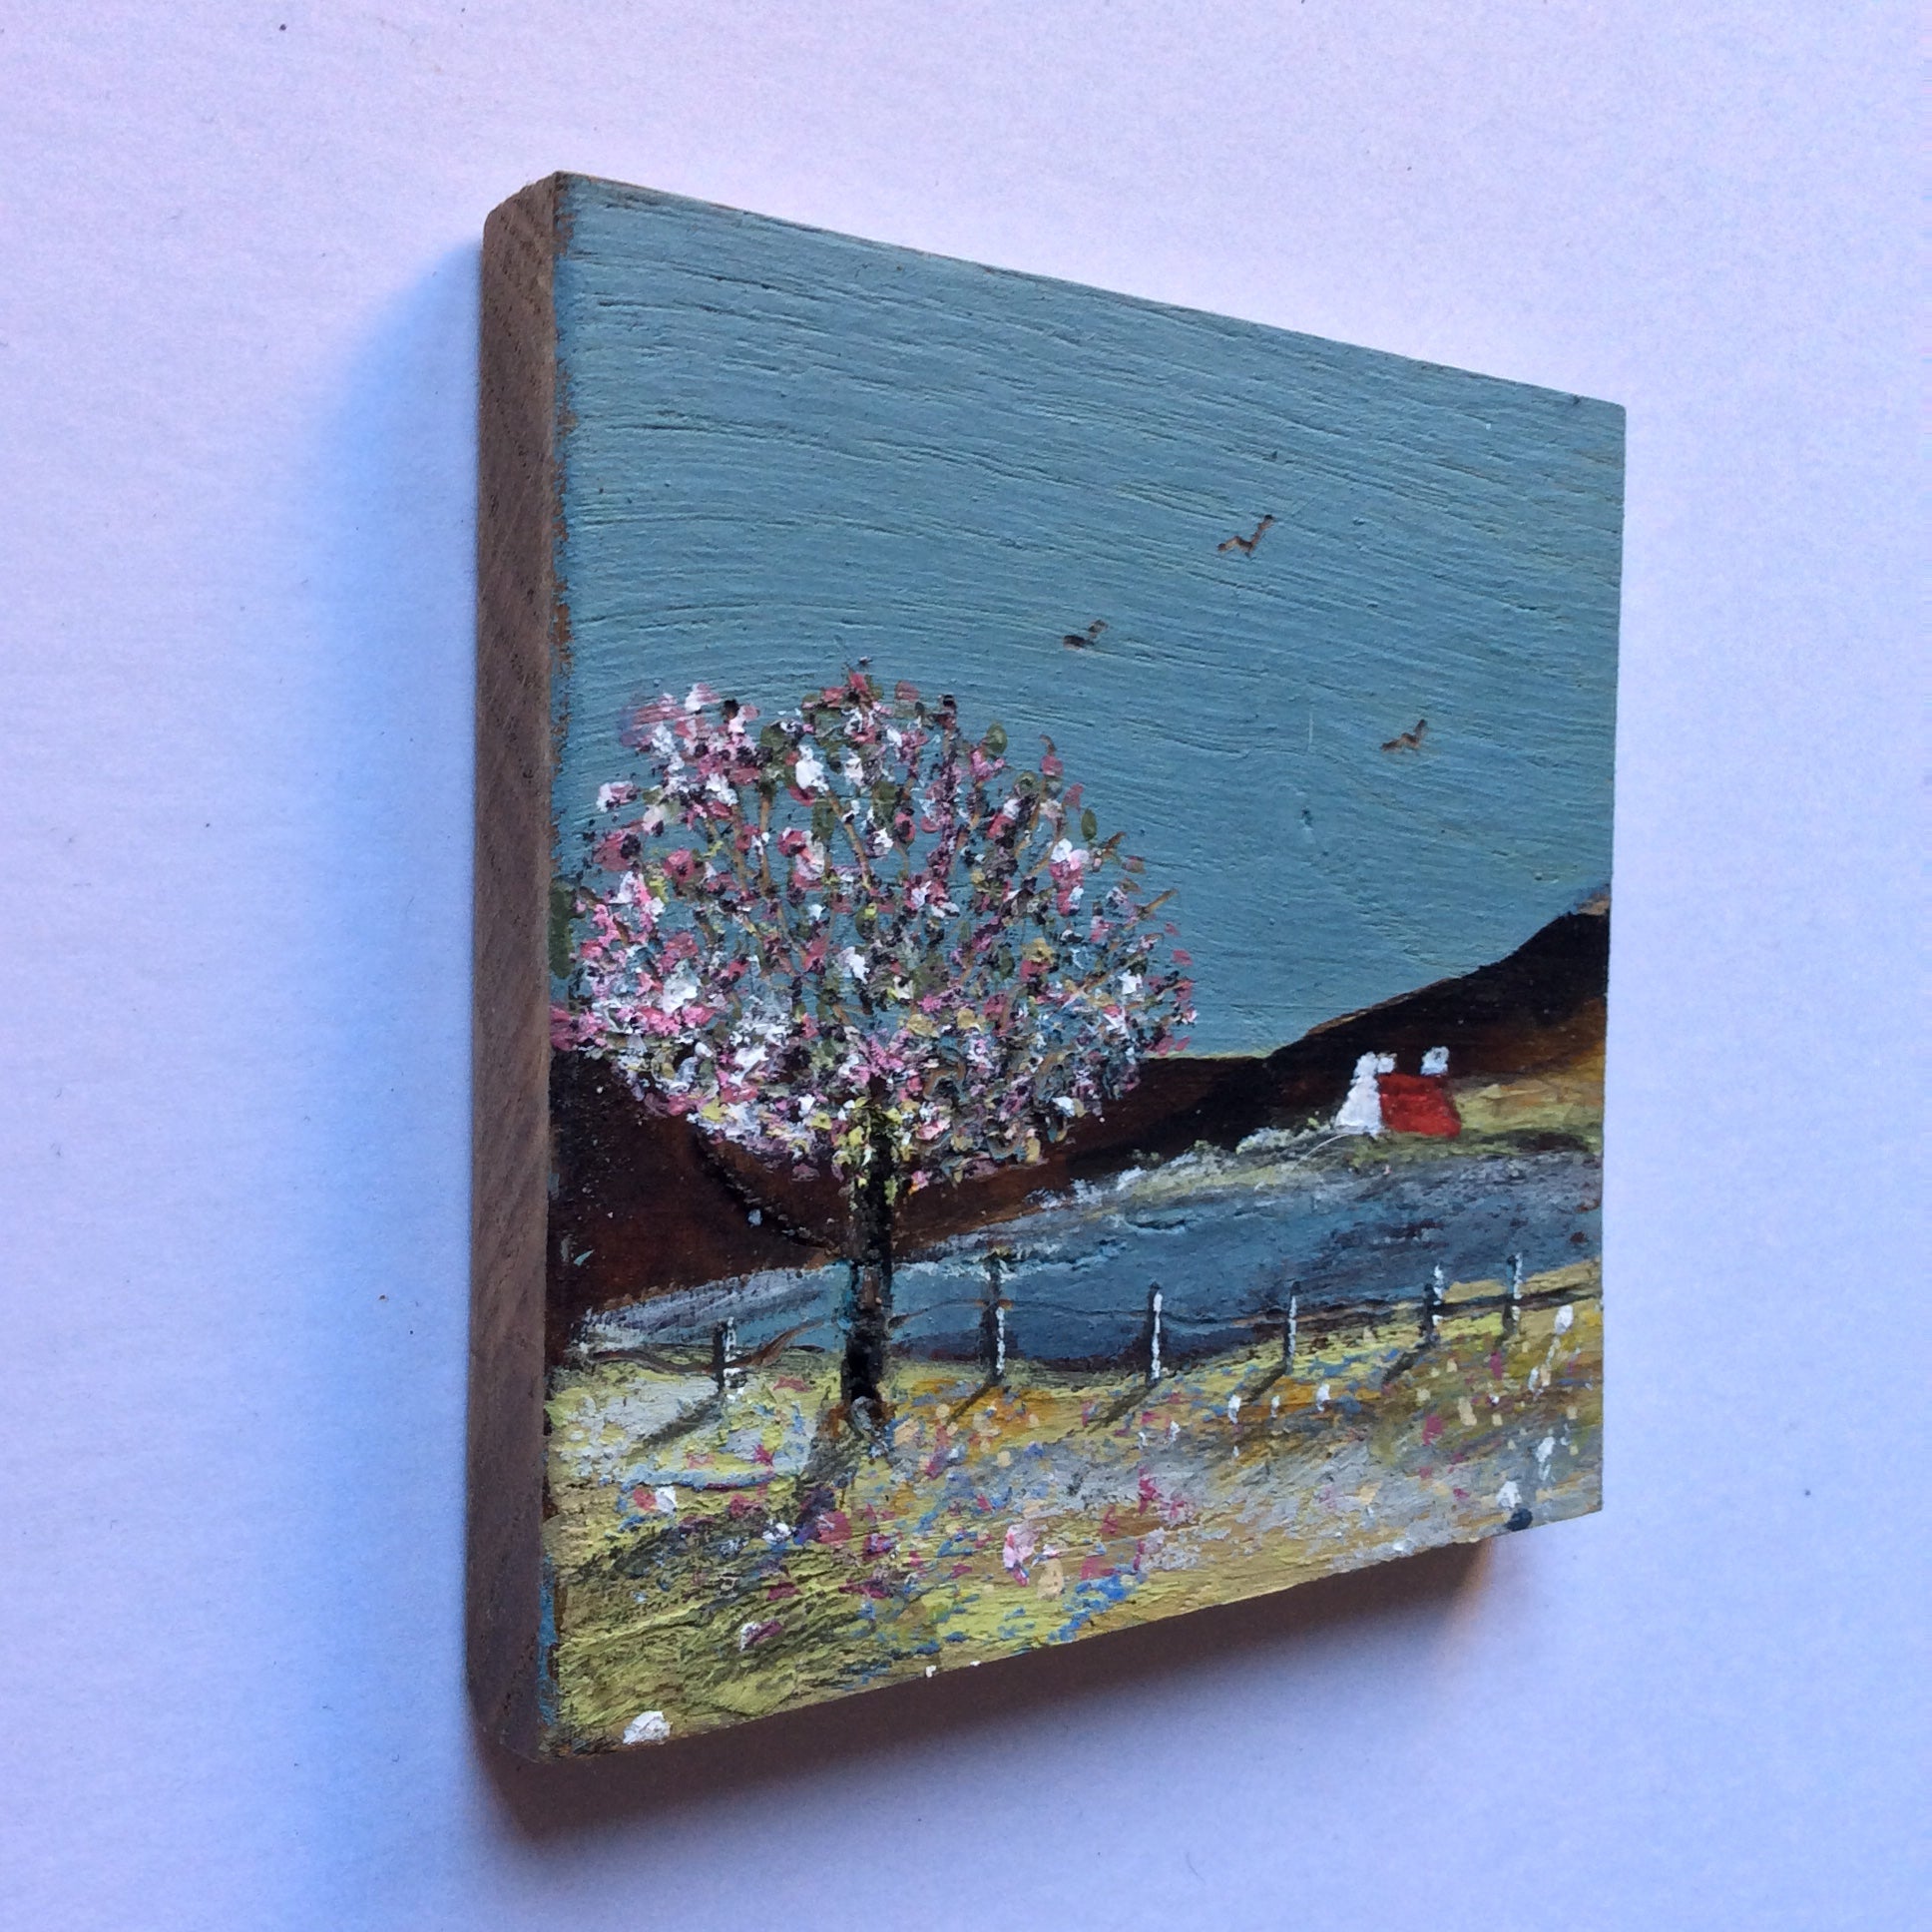 Mini Mixed Media Art on wood By Louise O'Hara - "Spring has arrived"